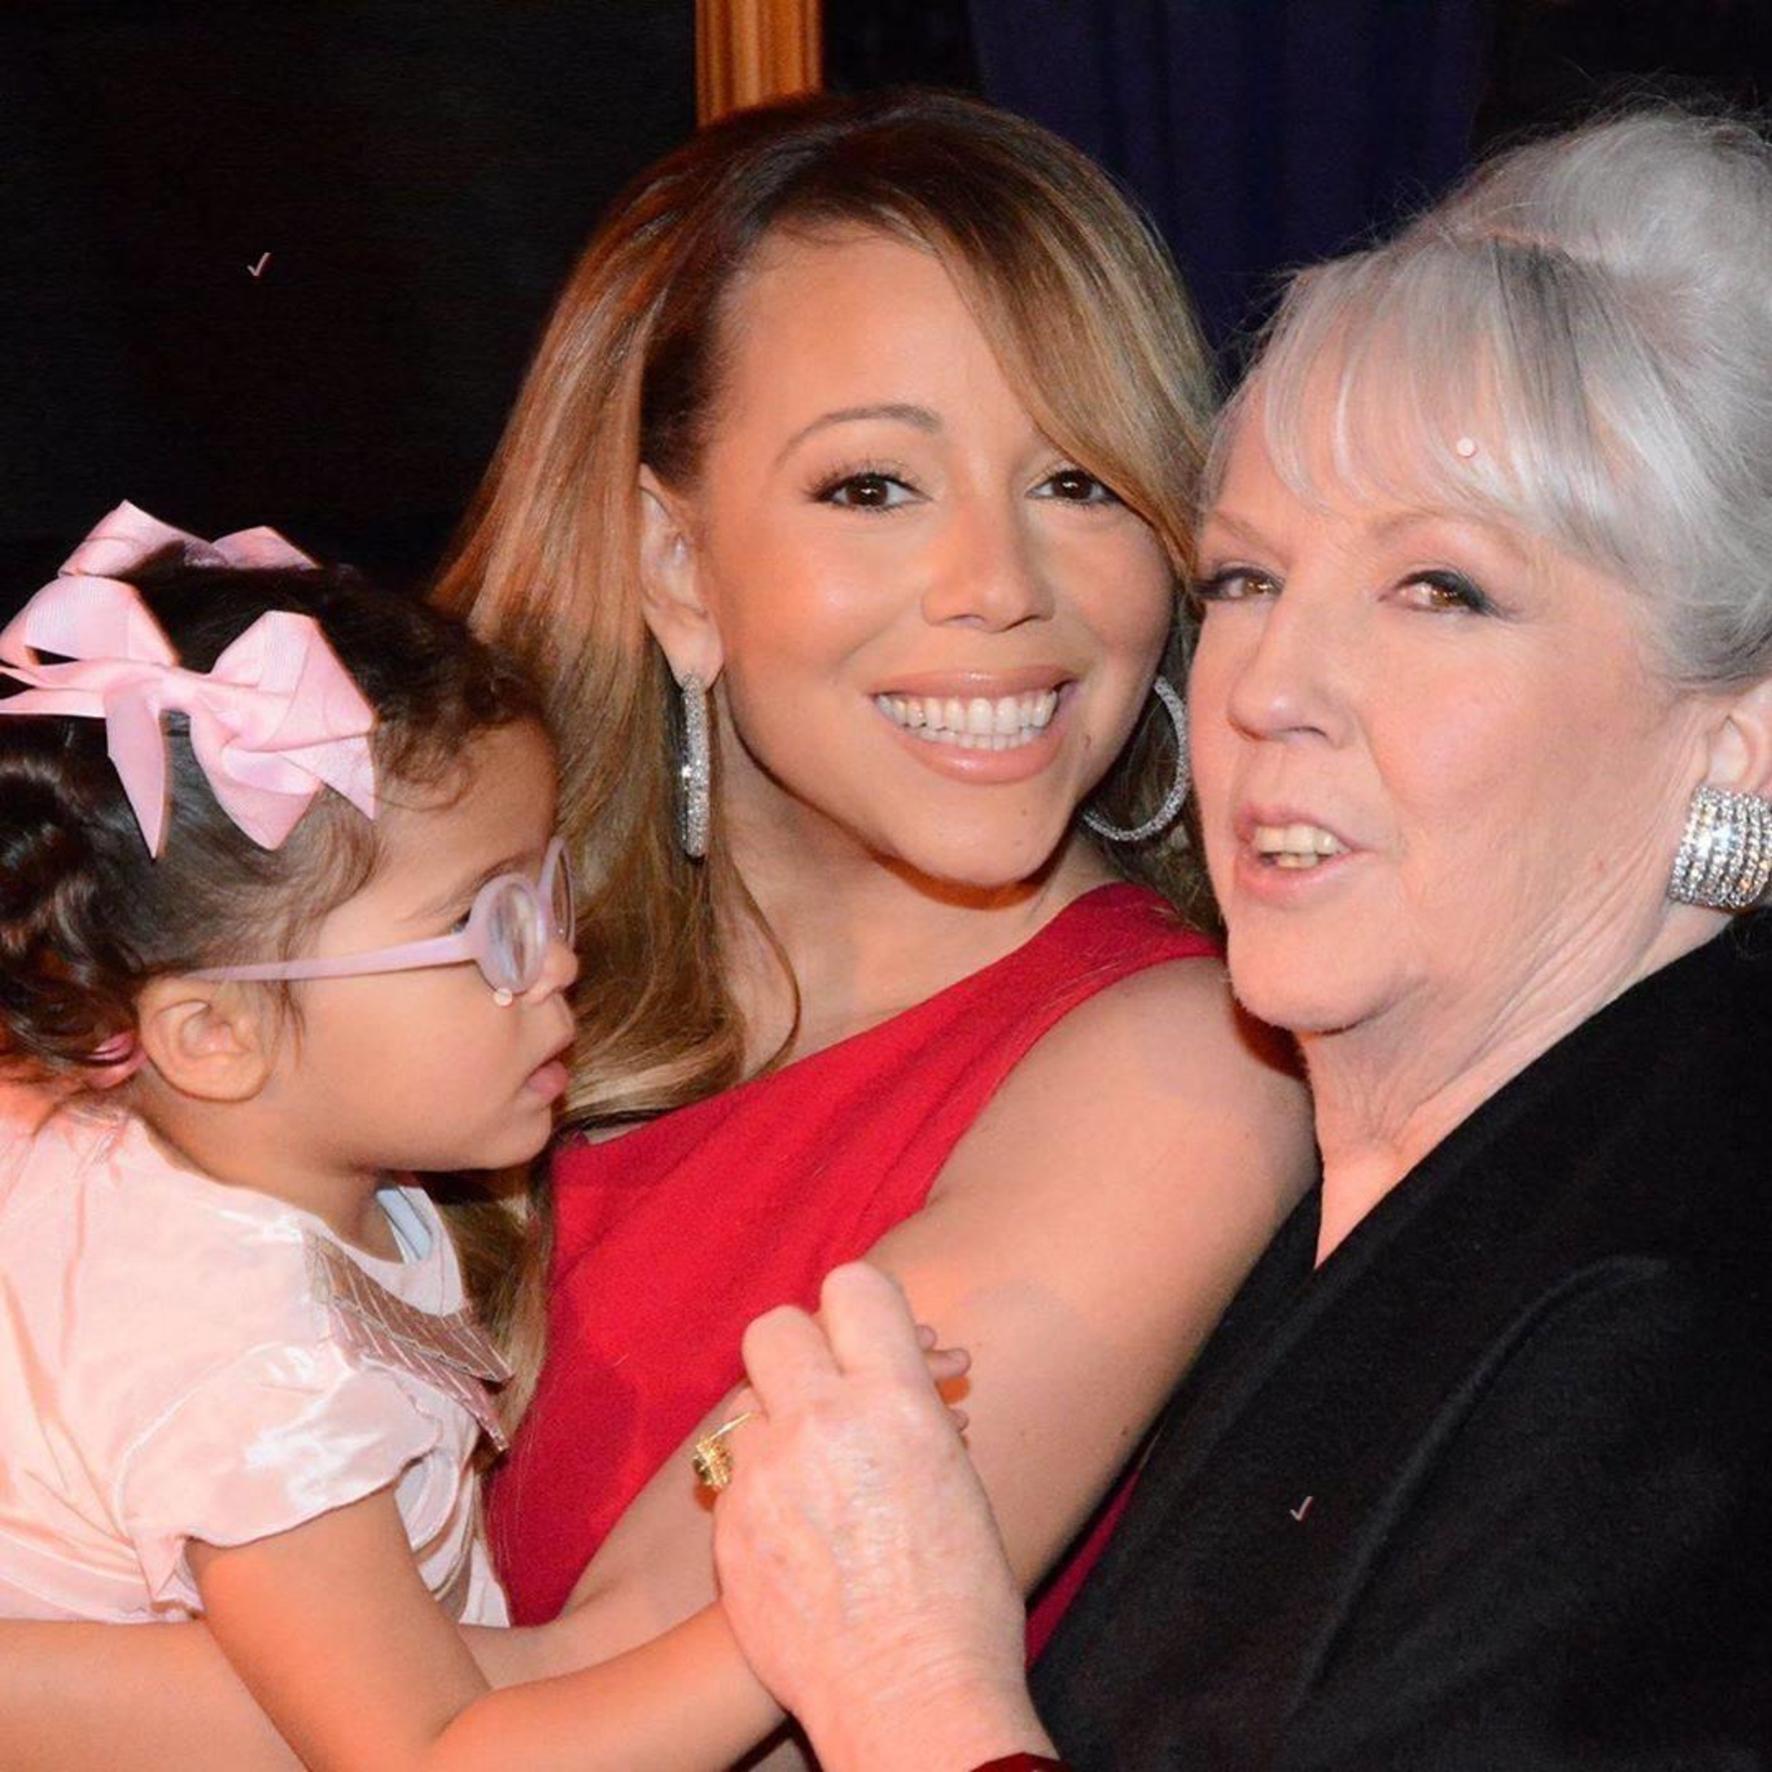 Mariah Carey (mariahcarey / 12.05.2019): Happy Mother's Day to my mom, Patricia and to all the Mommies in the land! Wishing you a beautiful day full of love 